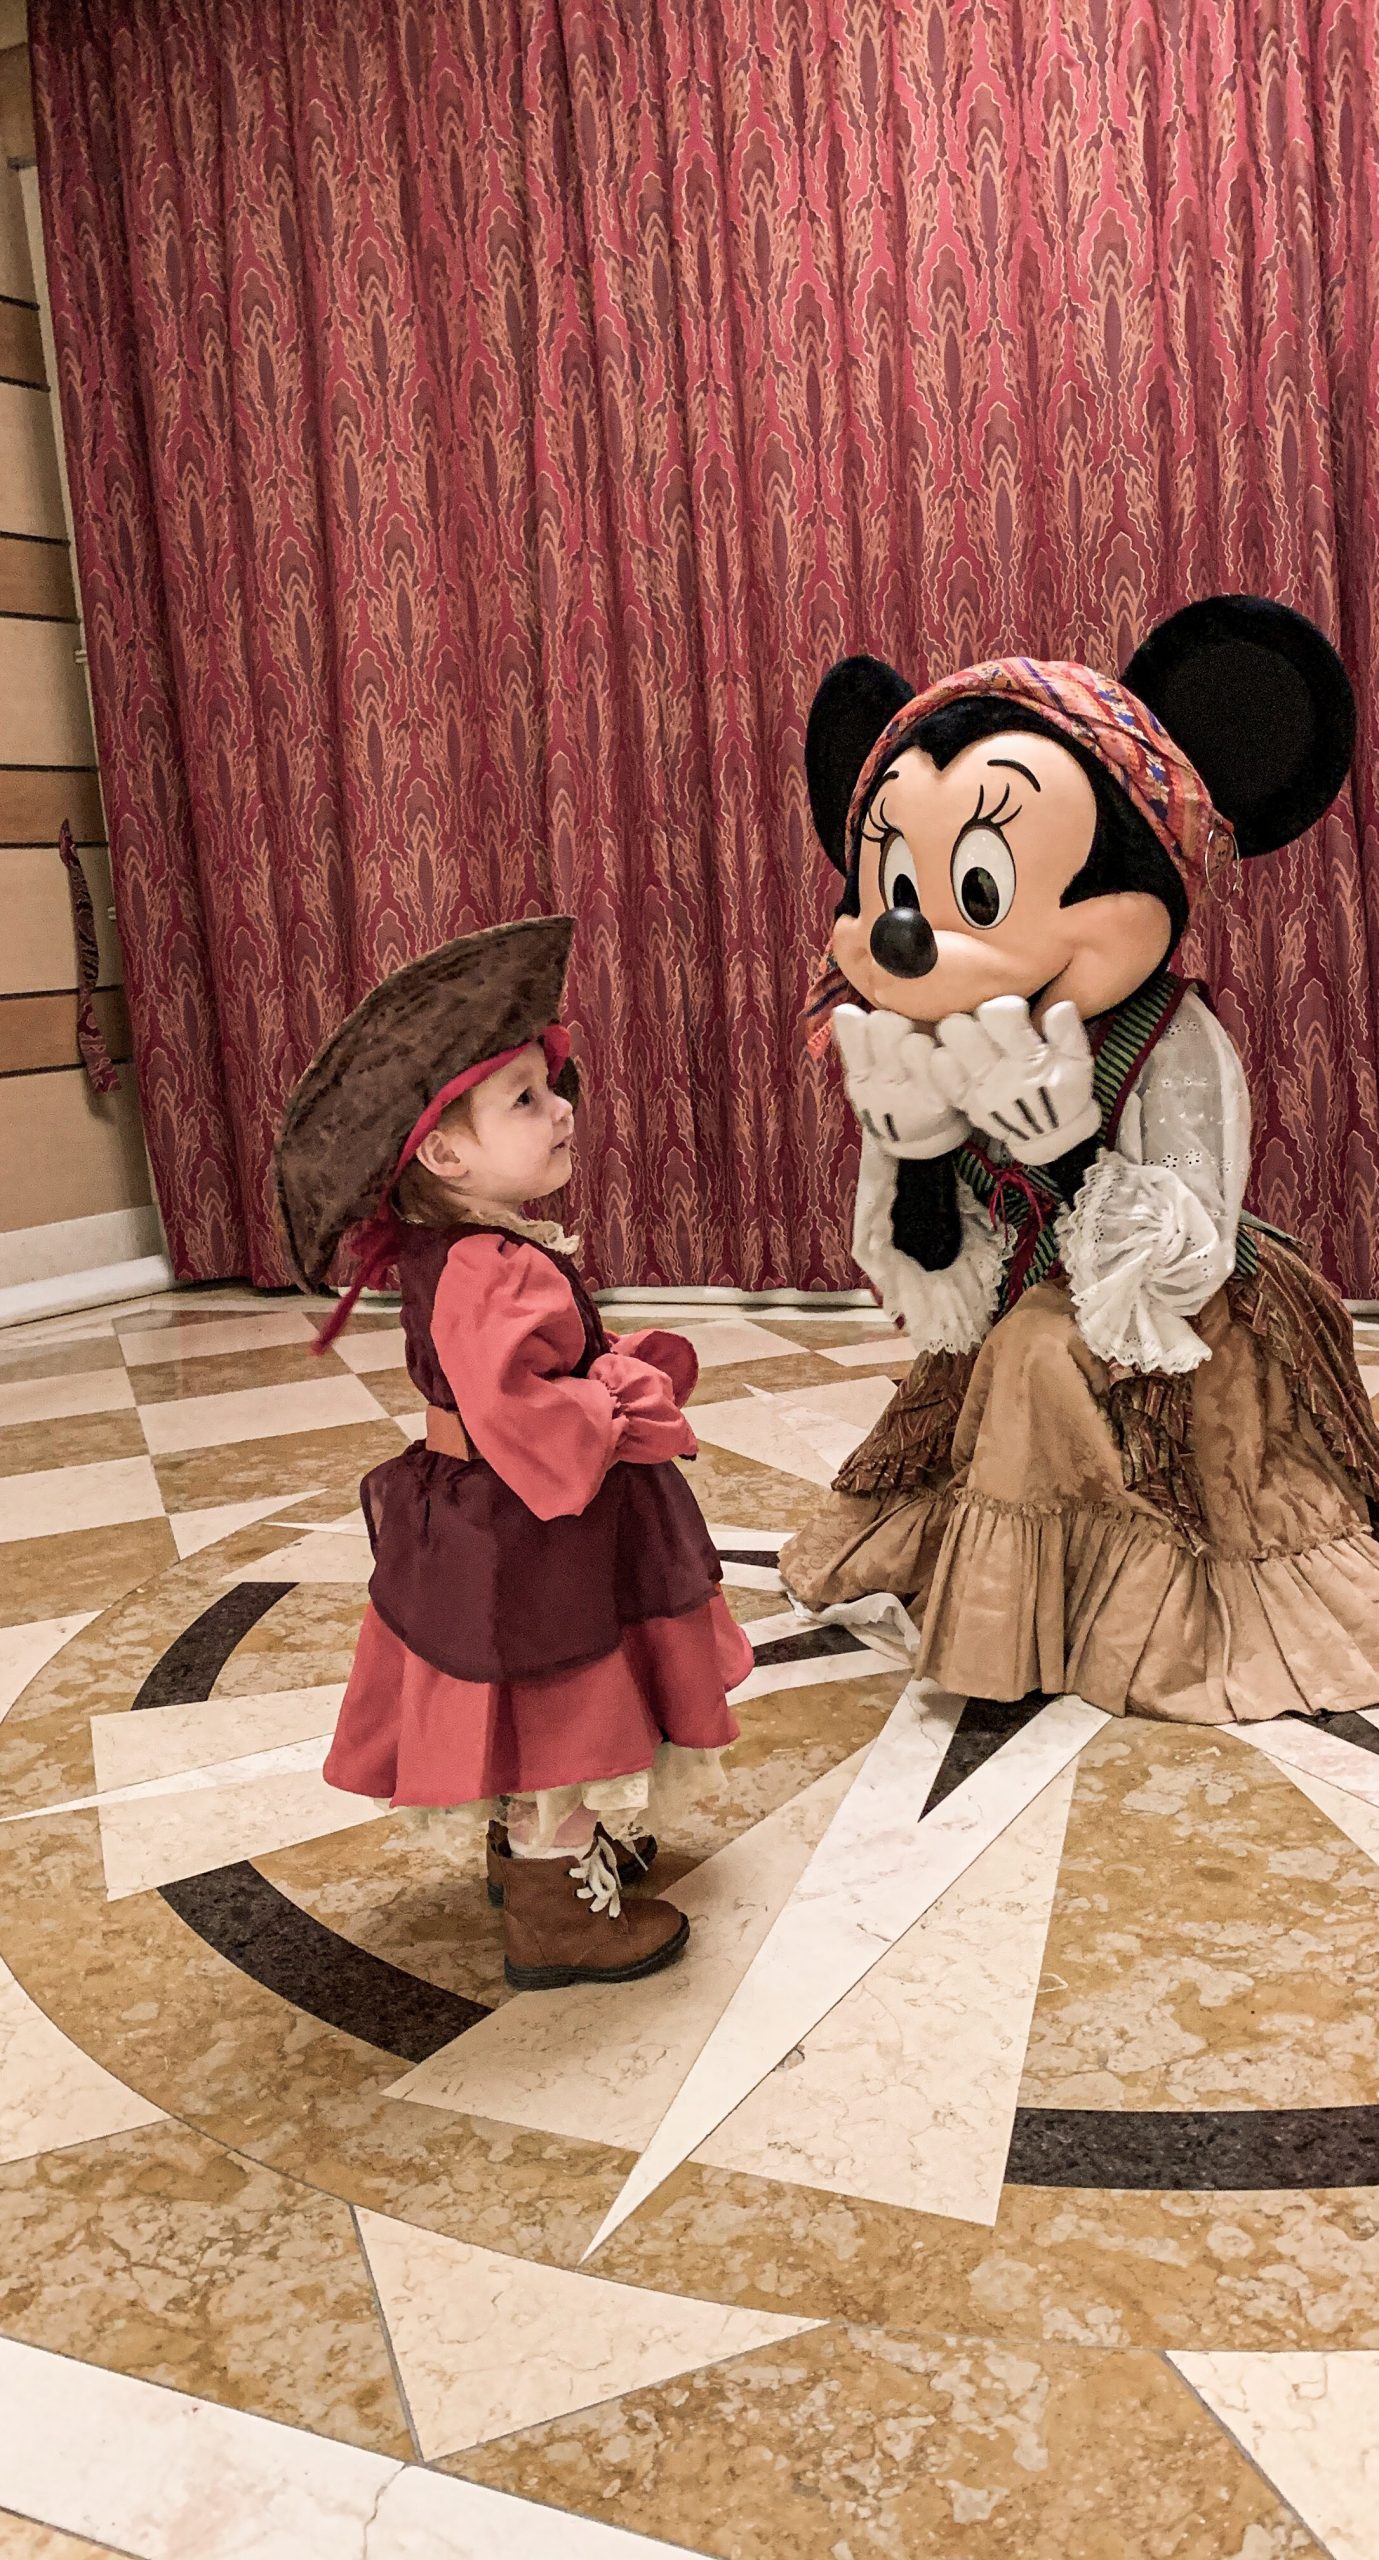 little girl dressed as a pirate meeting Minnie Mouse in her pirate outfit